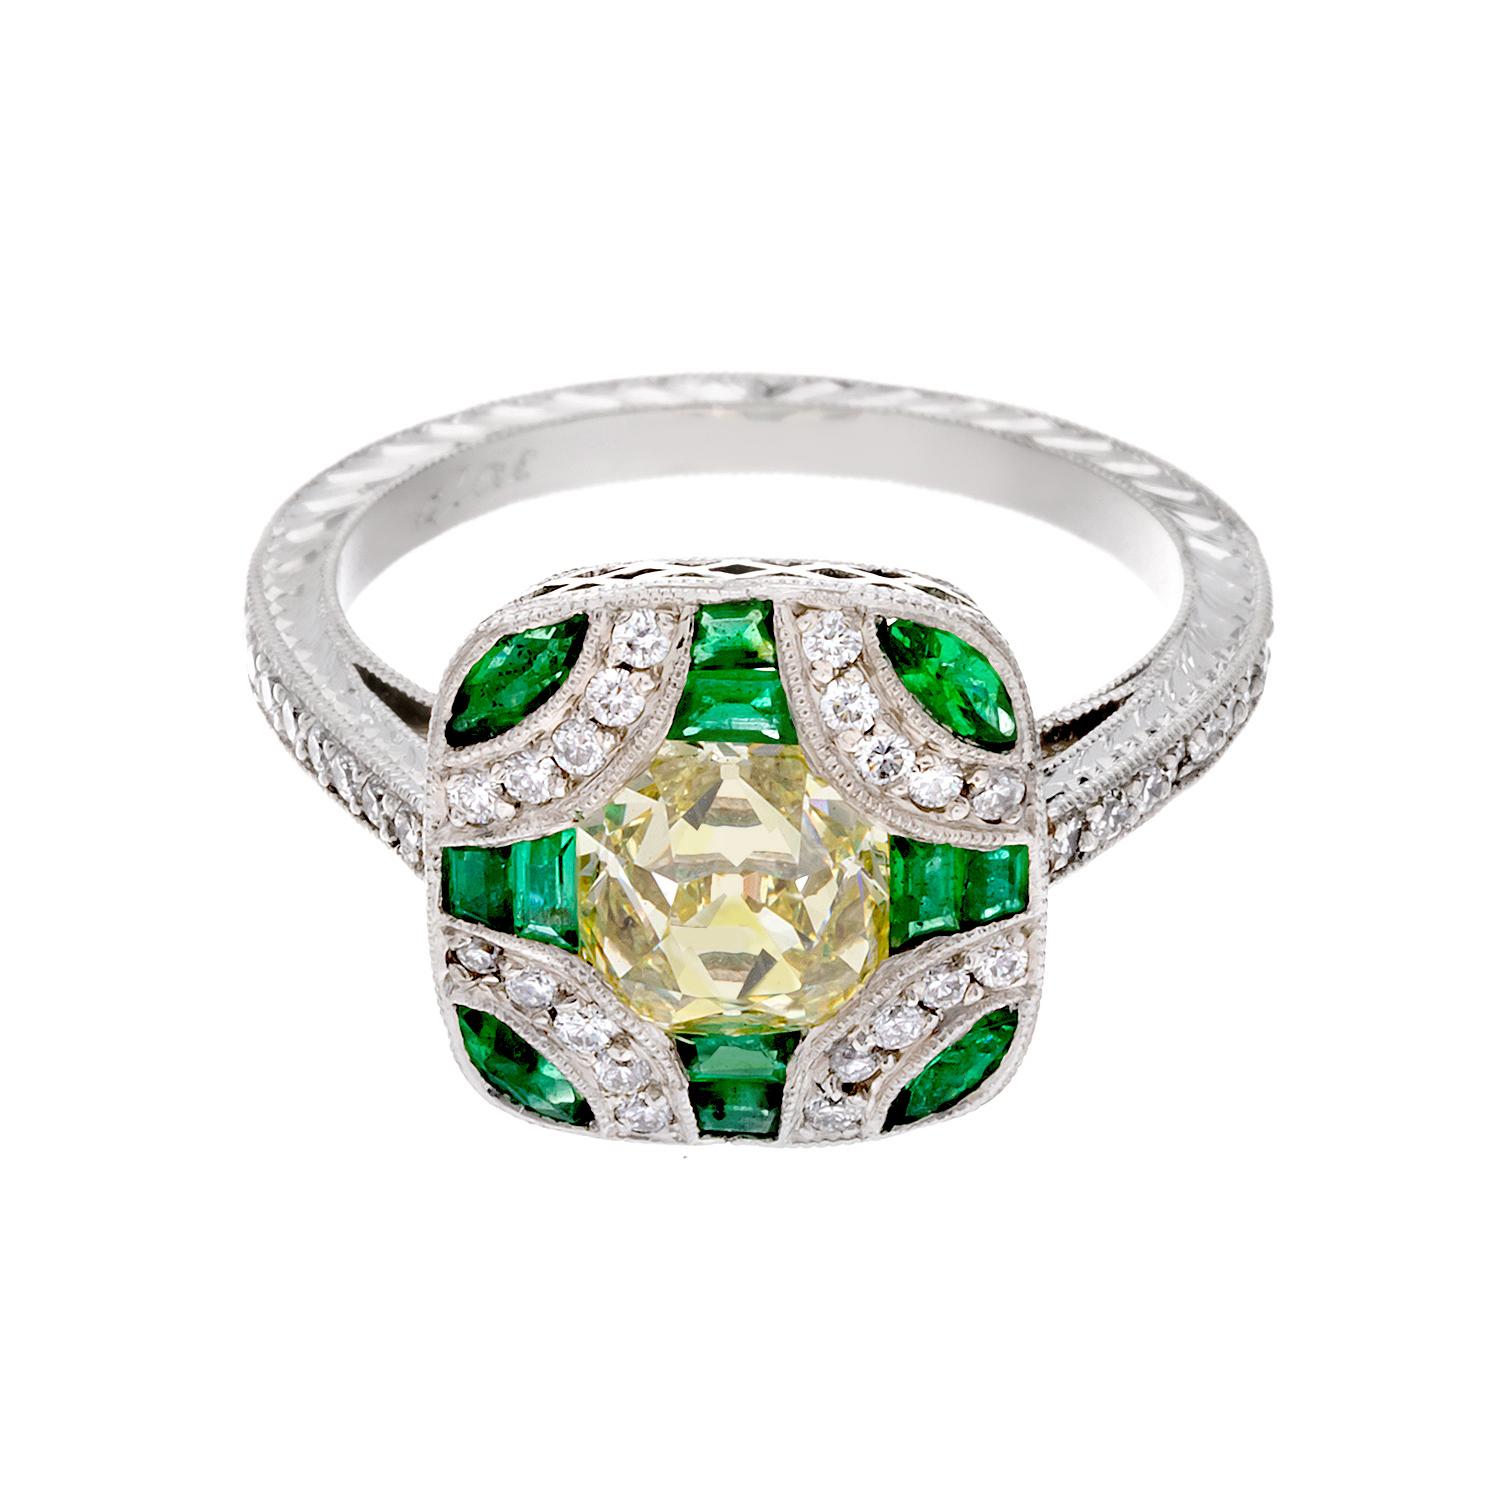 Antique Edwardian Style Fancy Yellow Old Mine Cut Diamond and Emerald Ring im Angebot 4